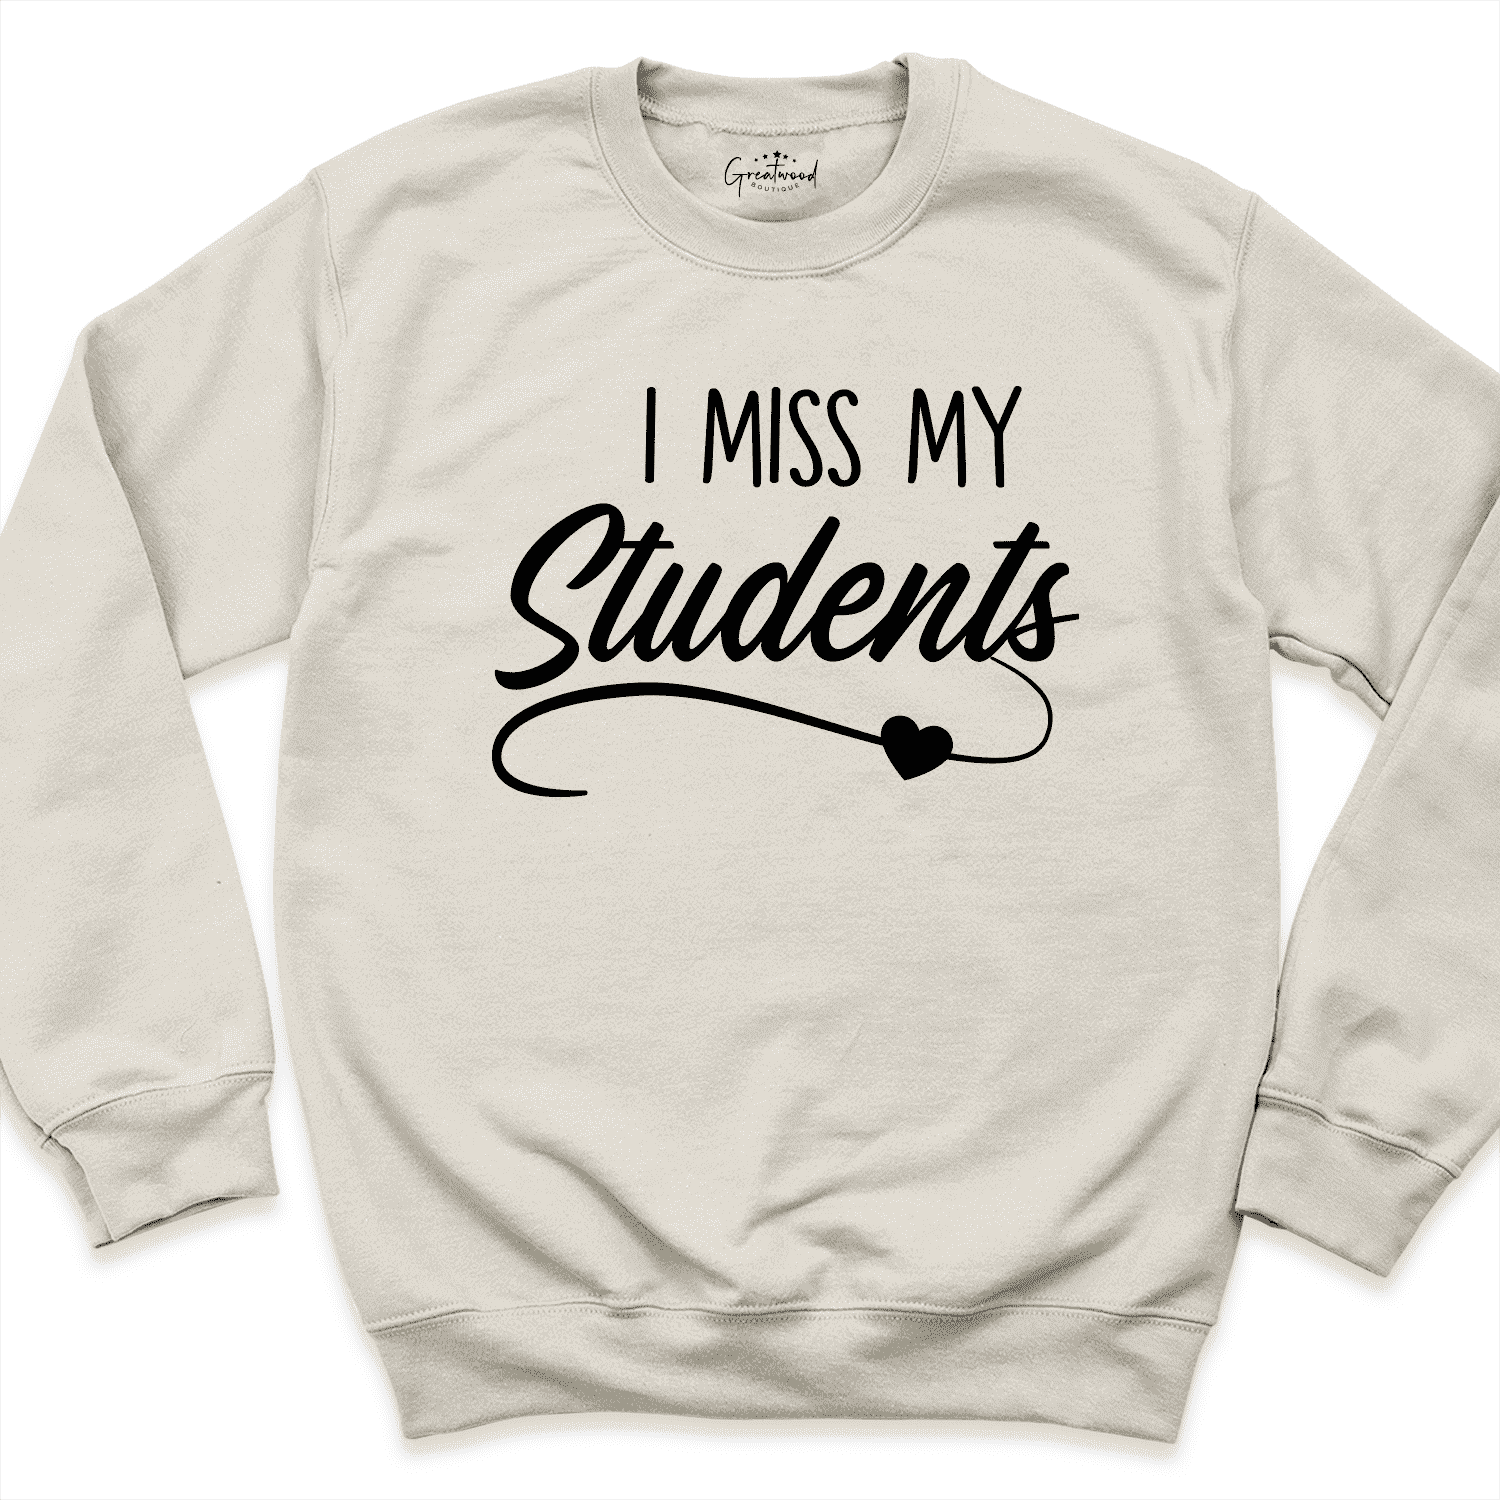 I Miss My Students Sweatshirt Sand - Greatwood Boutique